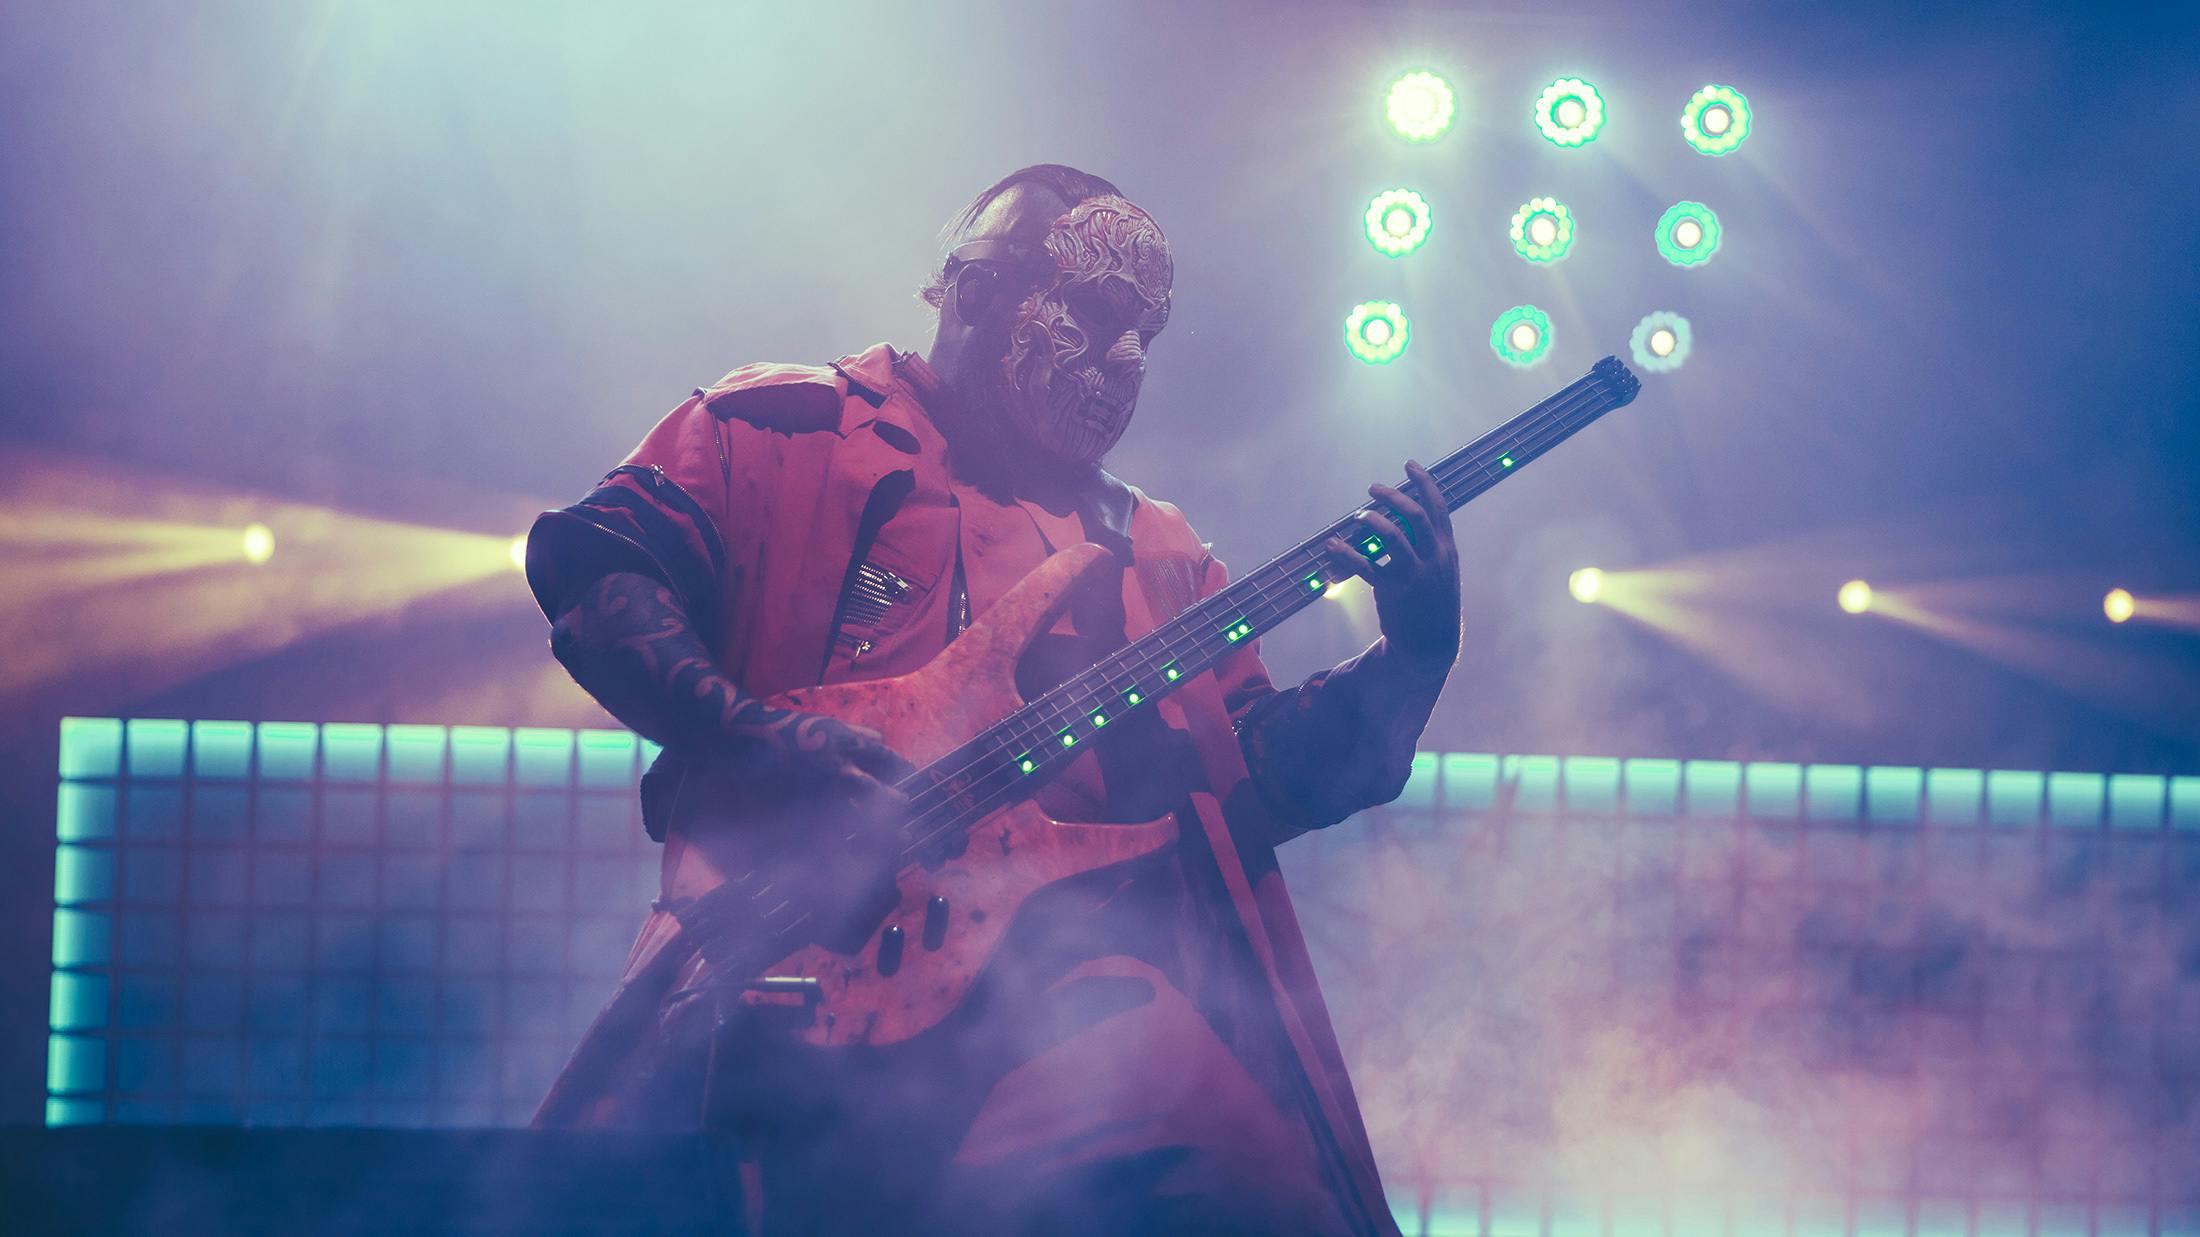 Slipknot's V-Man Had A "Look Of Mad Panic" When His Identity Was First Discovered